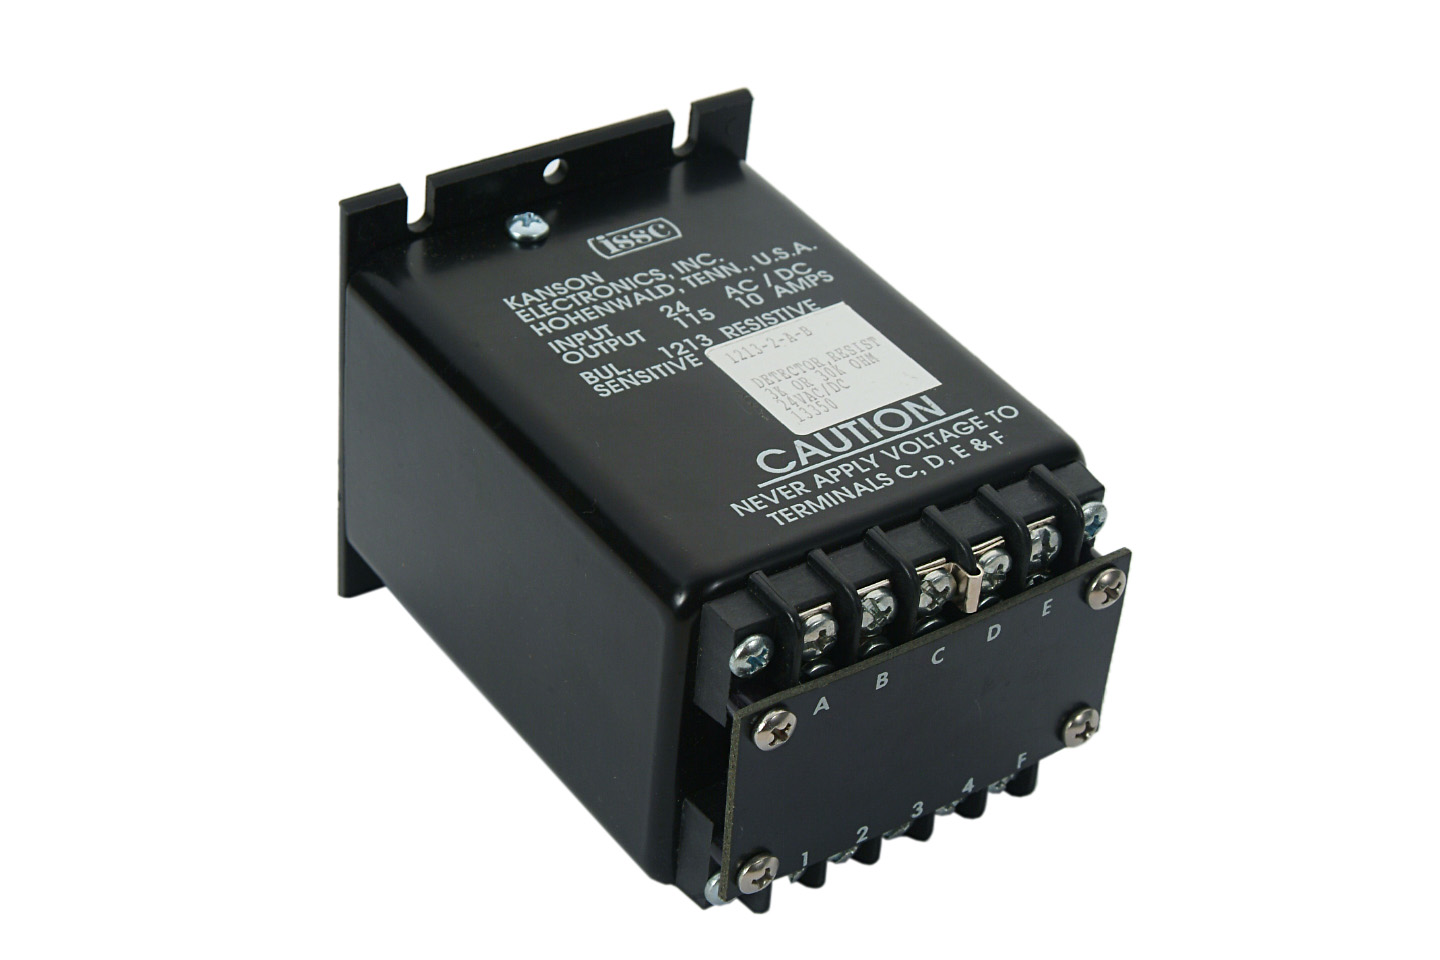 Details about   ISSC 1213-1-B-B RELAY NEW IN BOX * 